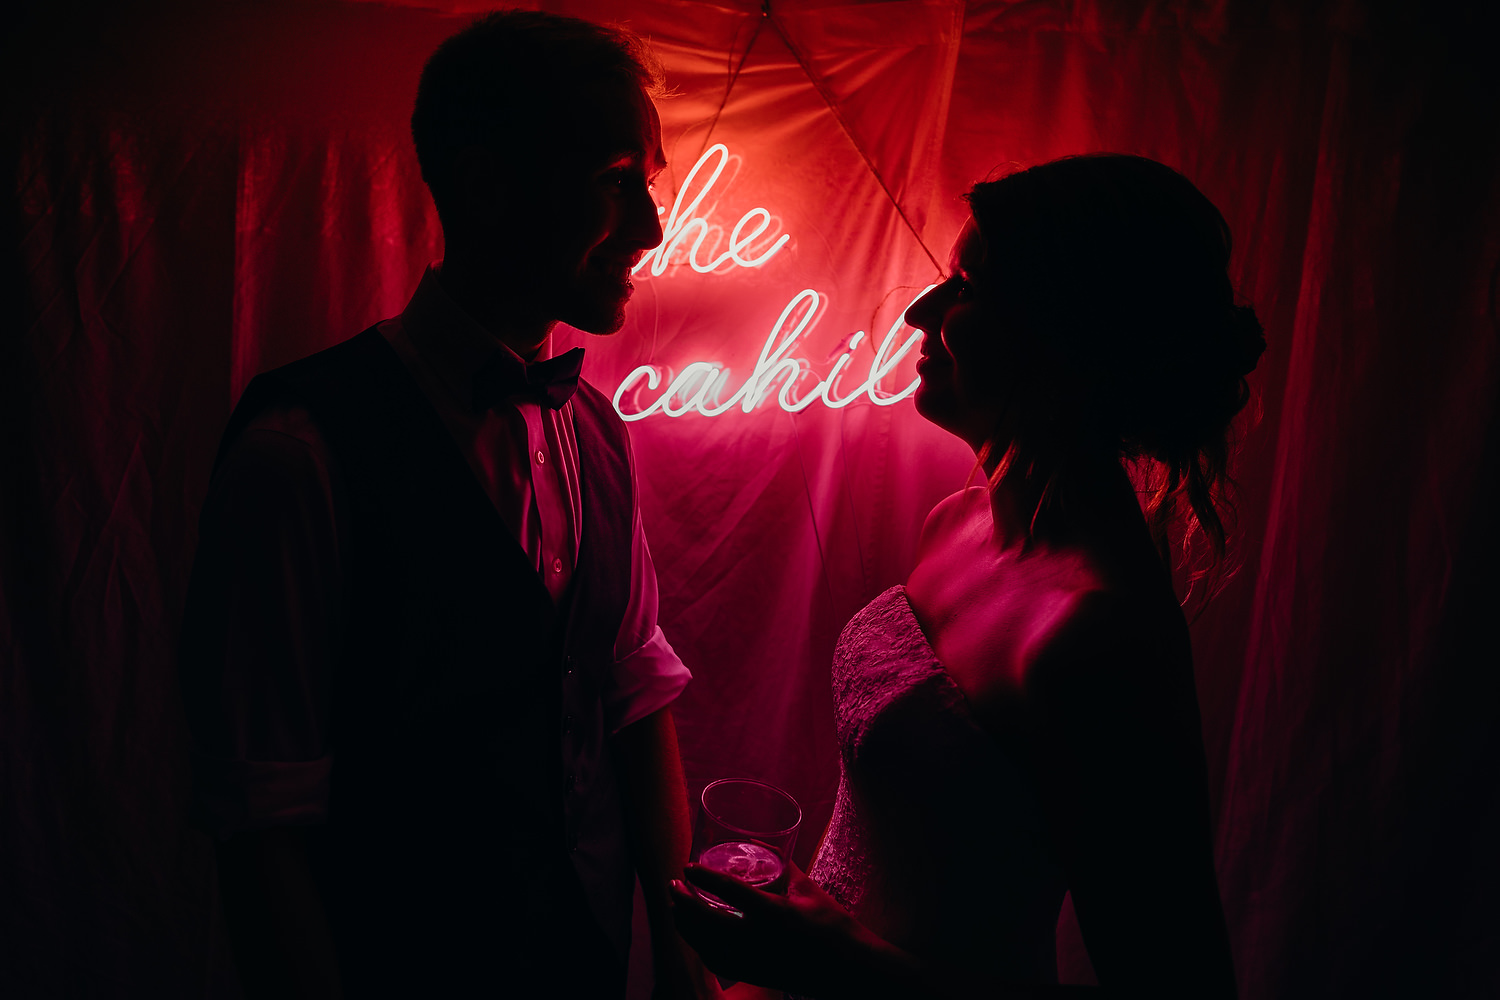 silhouetted bride and groom with their surname lit up in neon behind them